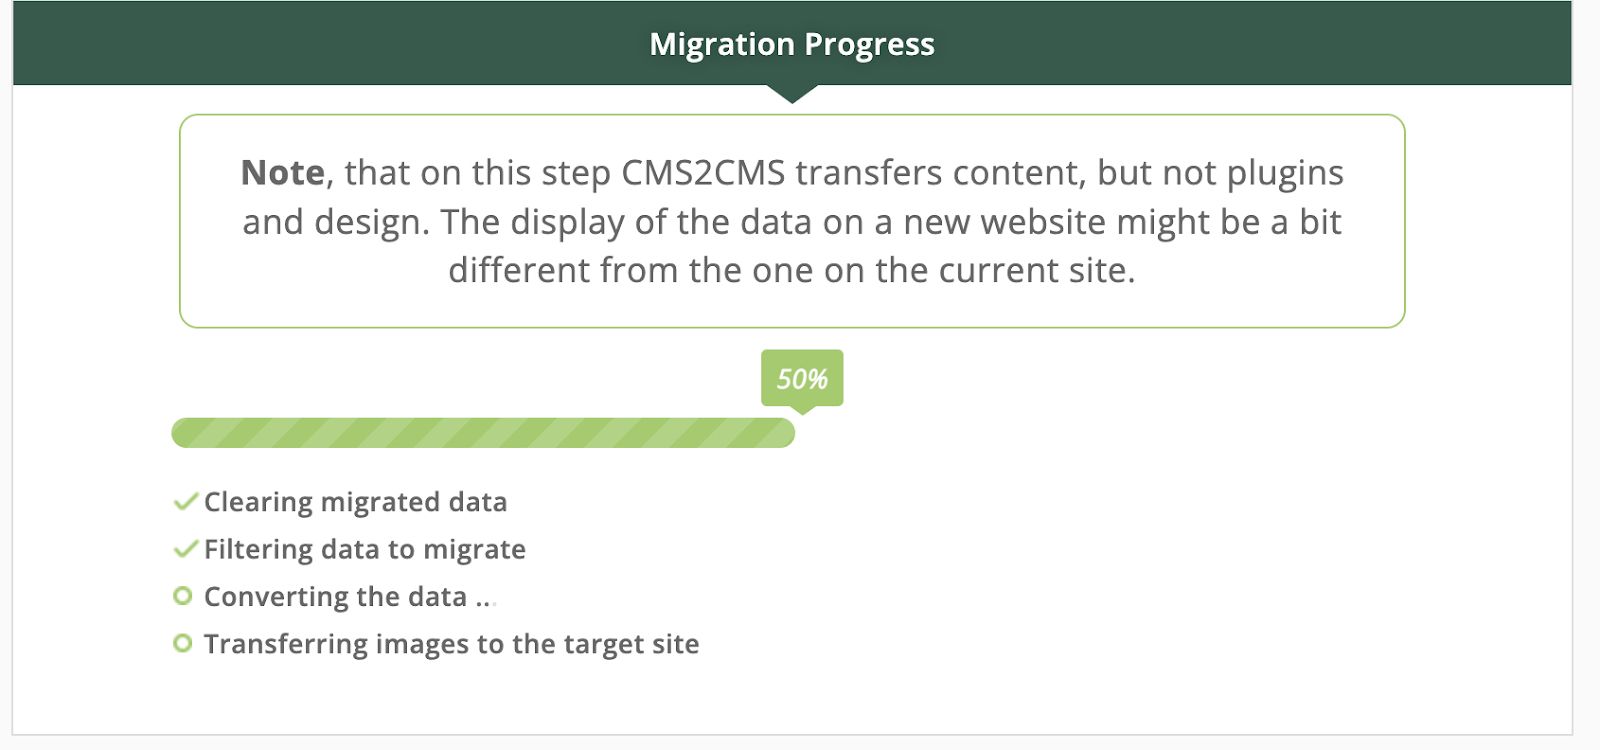 Once you've made your selections, click the green button at the bottom to start your migration.